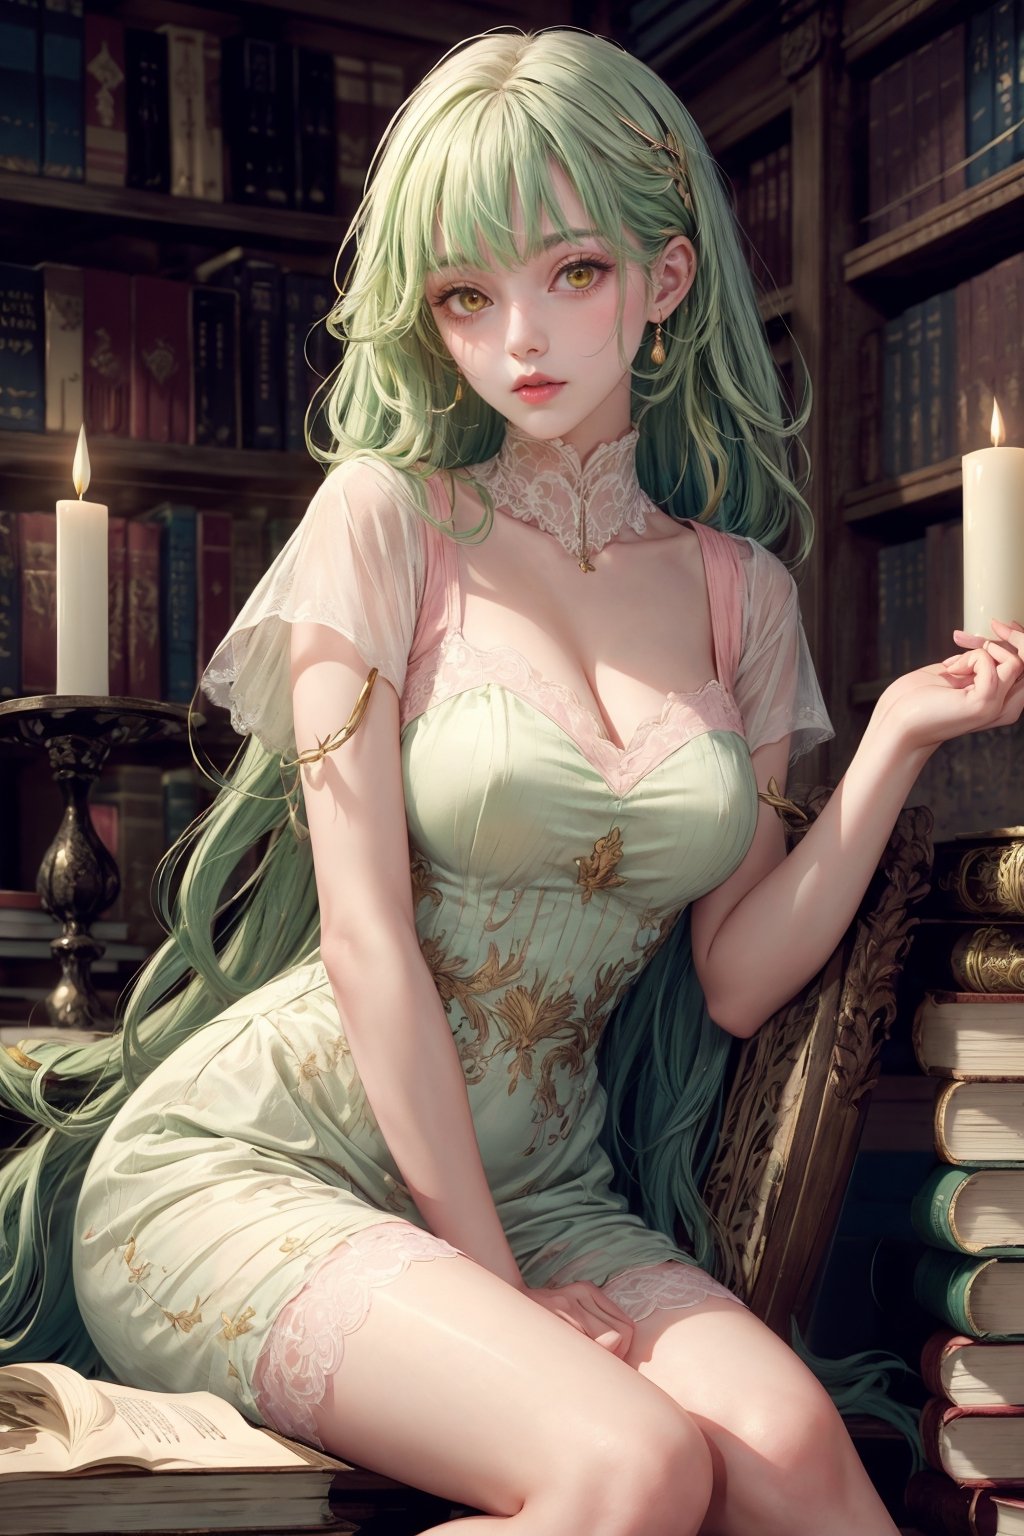 An incredibly beautiful girl, pink lips, flushed cheeks, long green hair curled in a wave, white skin, yellow eyes, wearing a period dress, old library scene with several books around, bookshelf, candles illuminating the rustic environment.